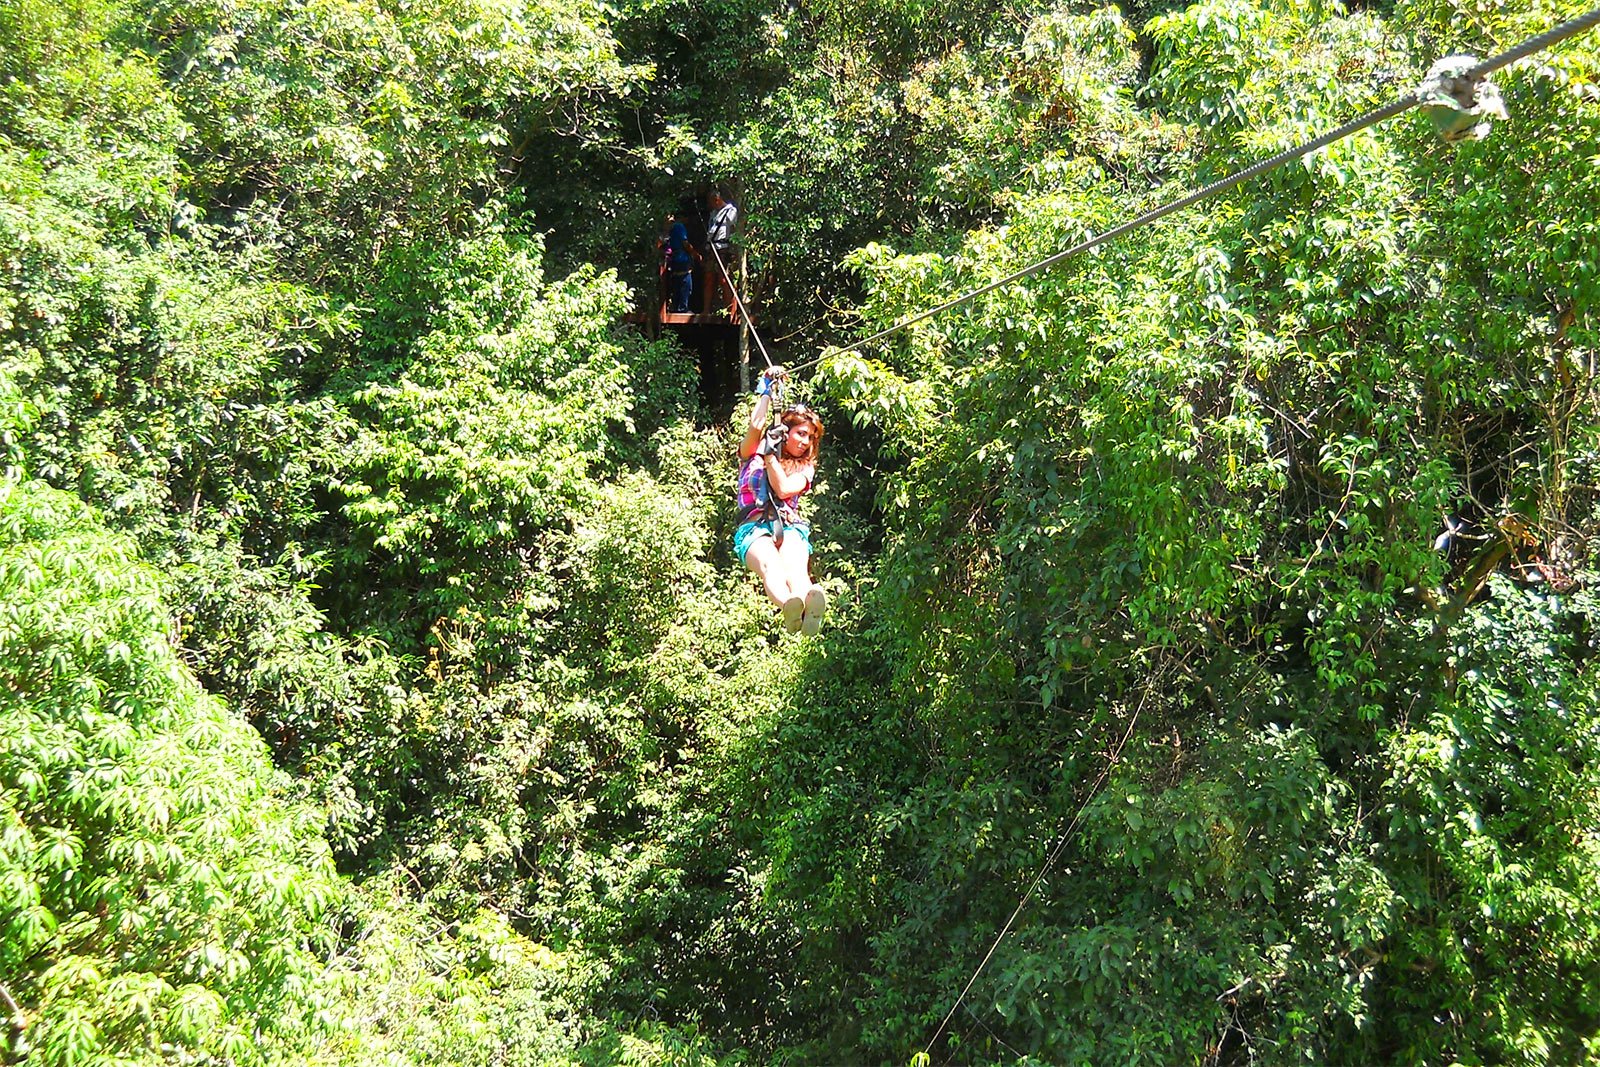 How to fly through the jungle on a cable on Koh Samui